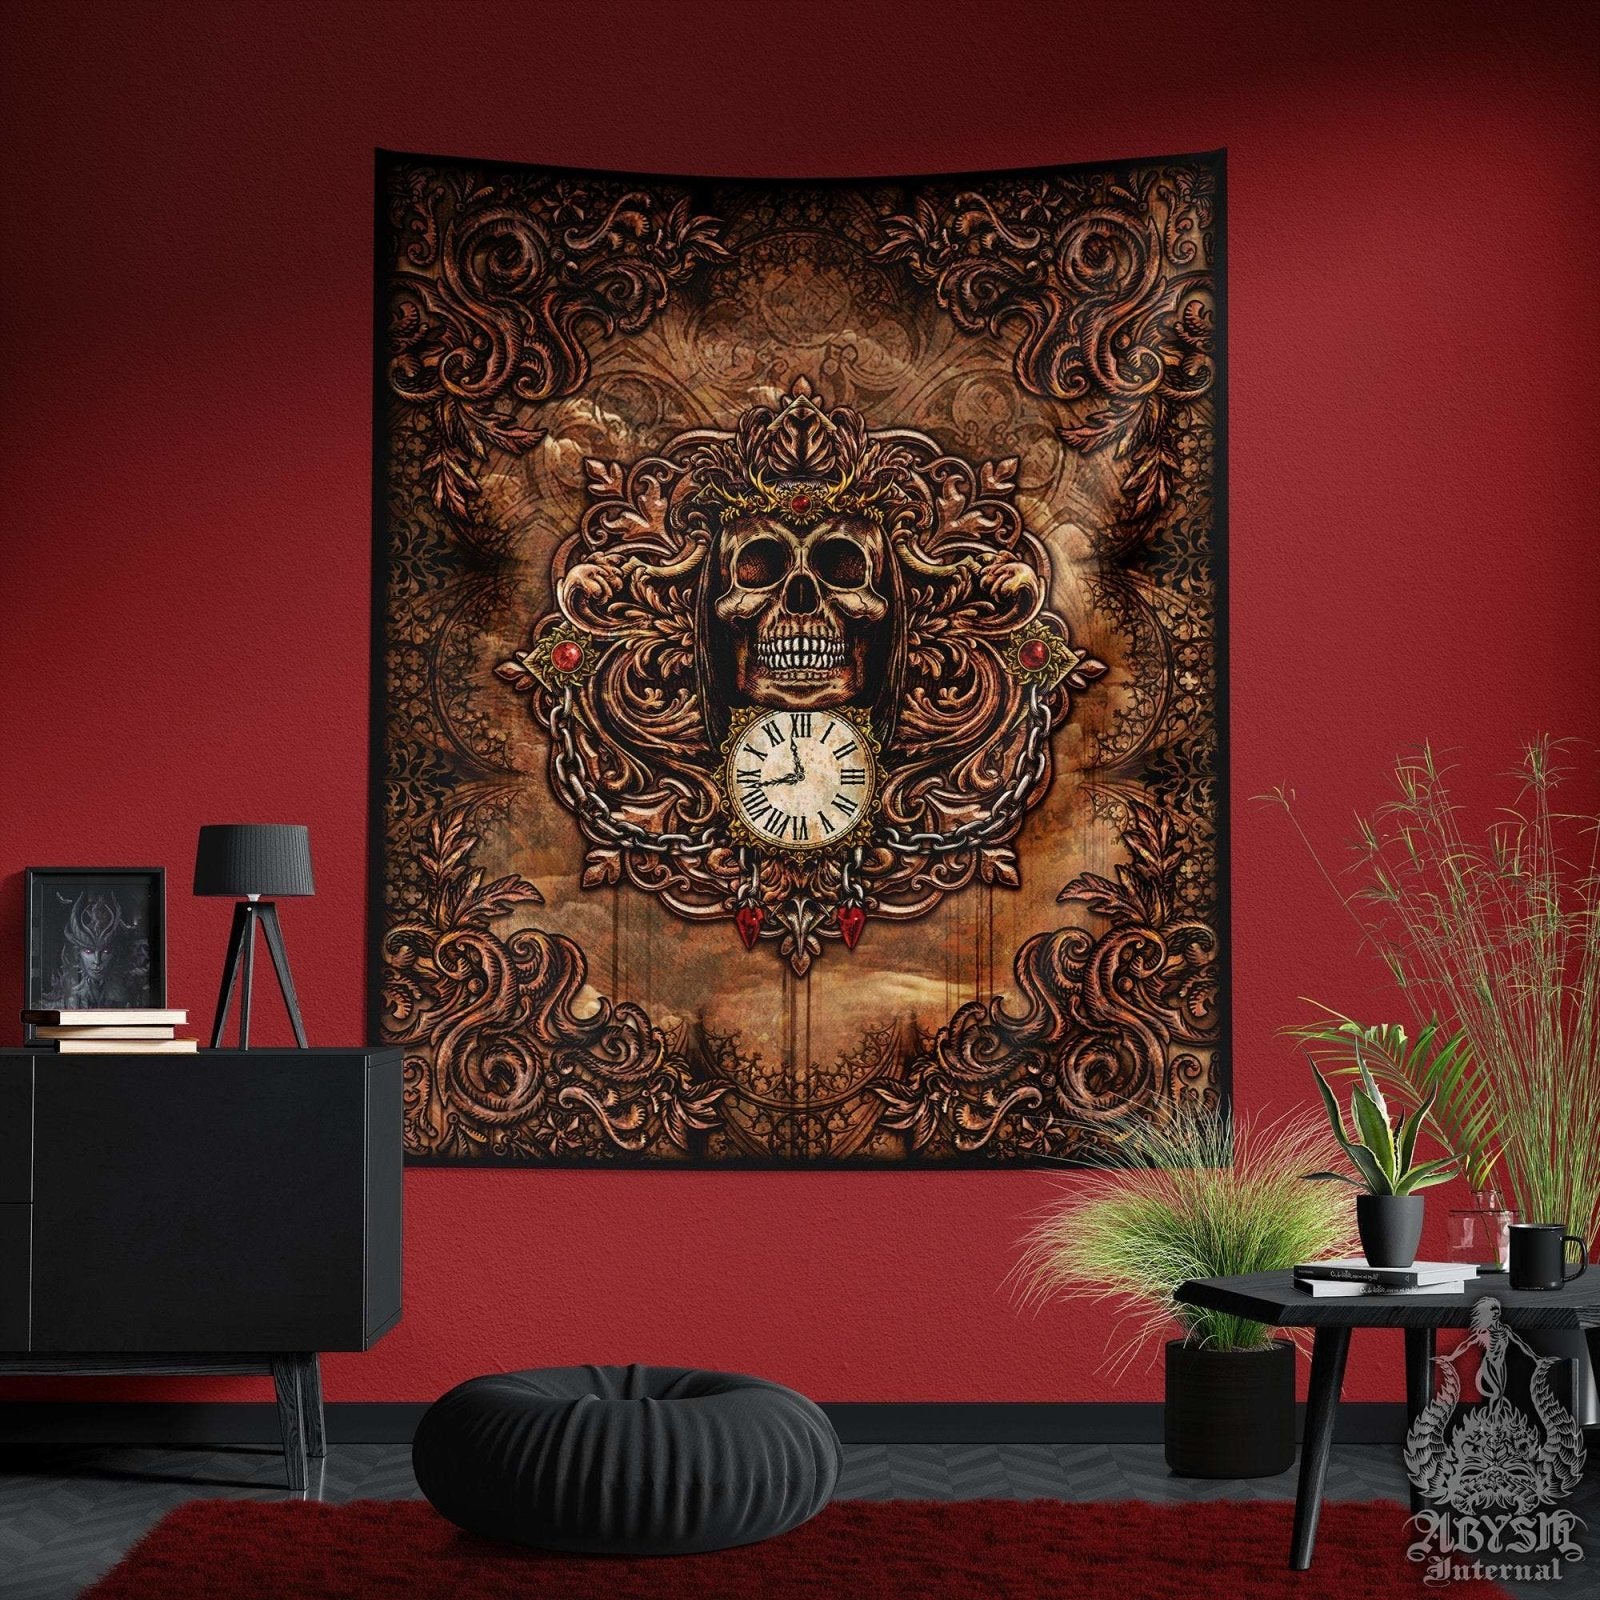 Gothic Tapestry, Grim Reaper, Horror Wall Hanging, Halloween Home Decor, Art Print, Skull - 3 Colors - Abysm Internal